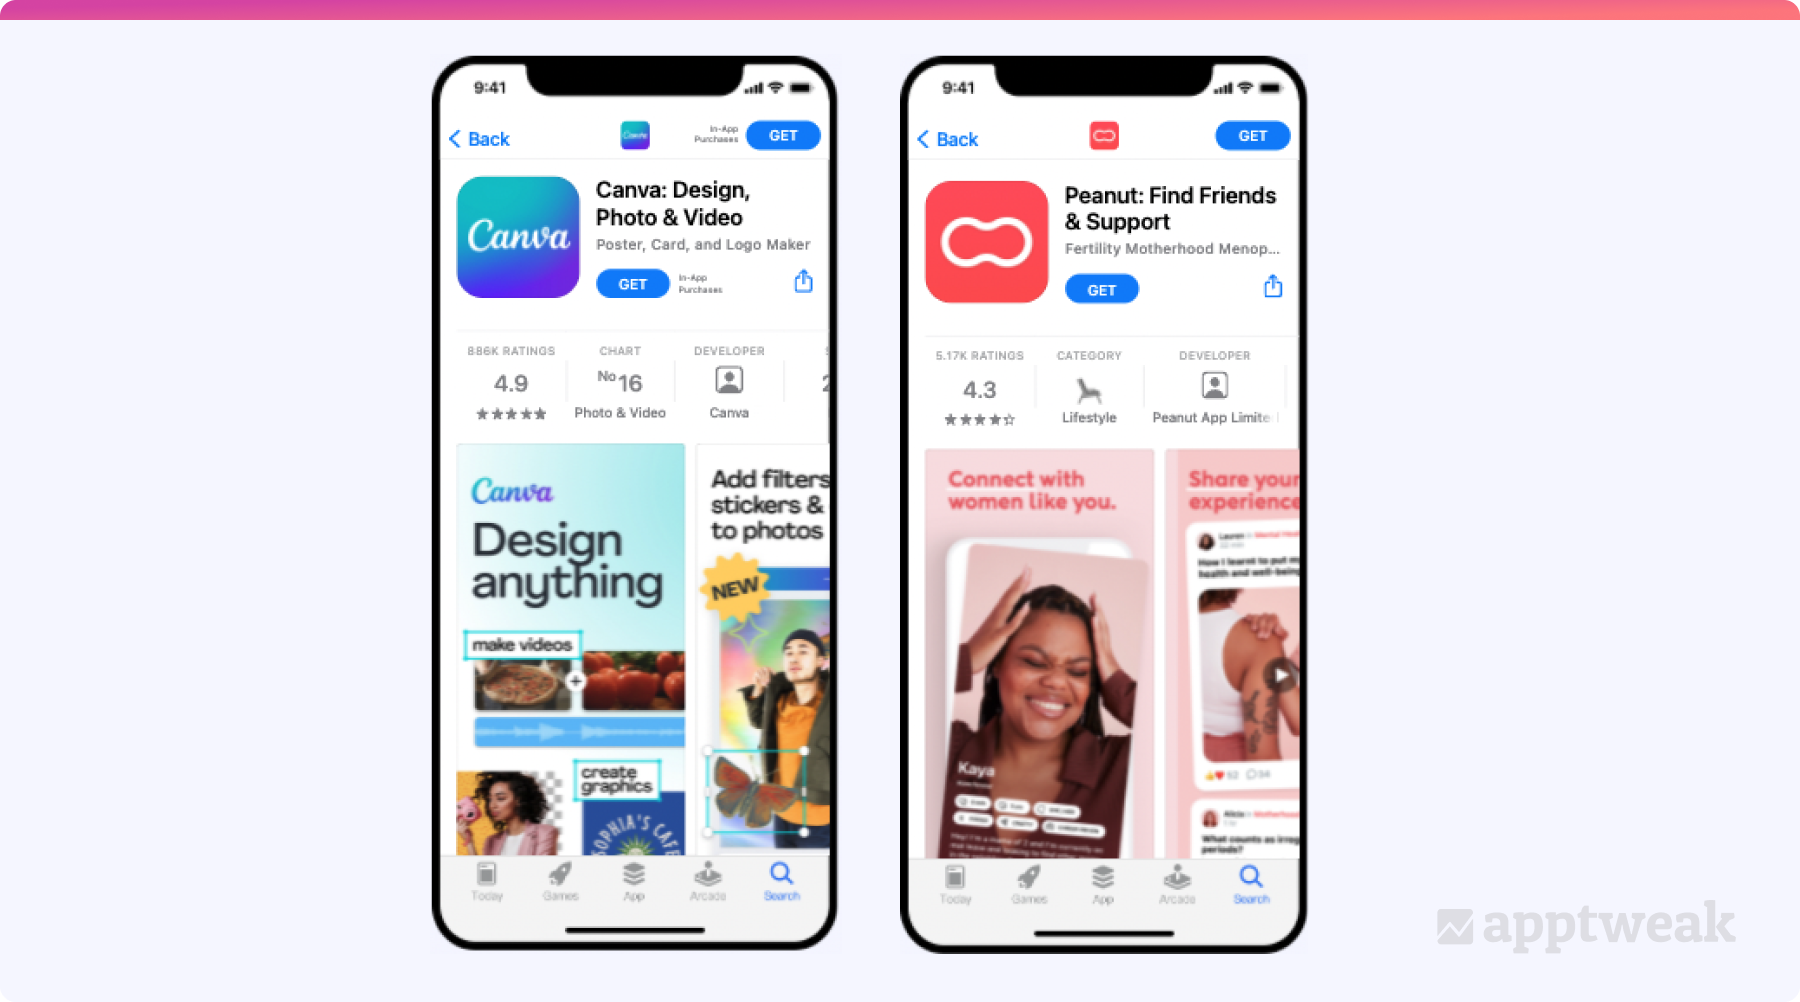 Canva and Peanut’s App Store product pages